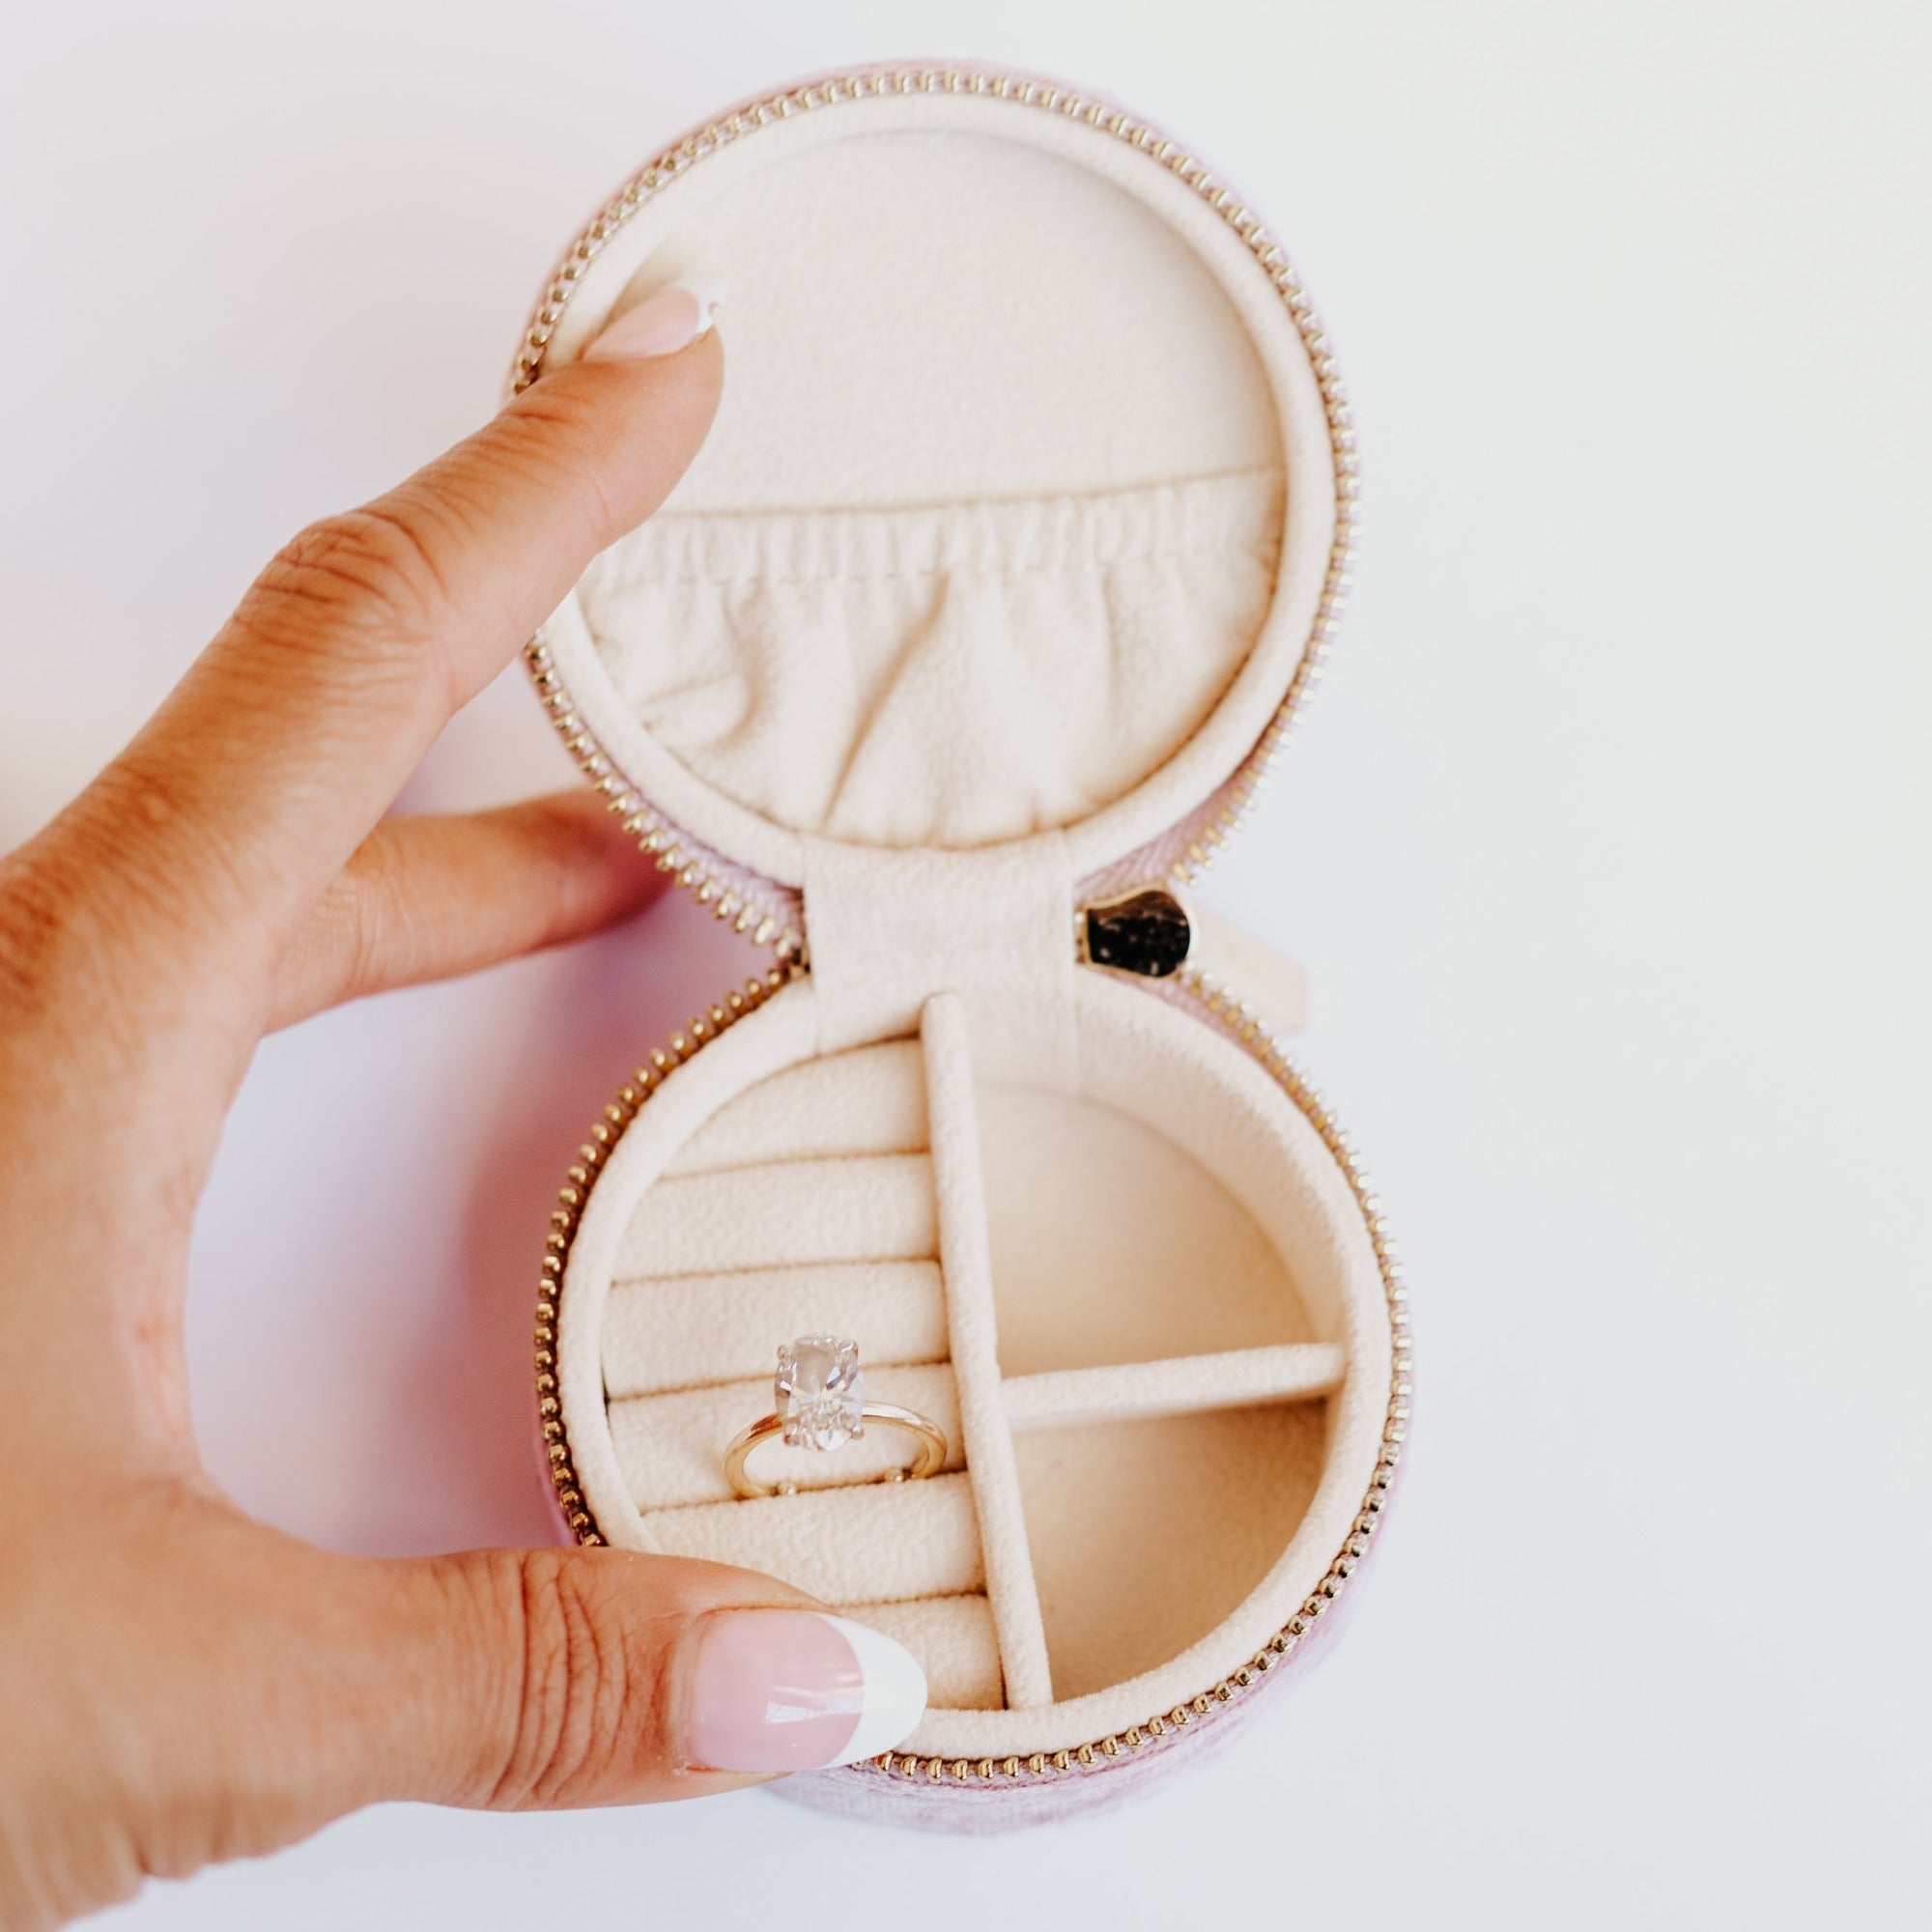 Light pink velvet jewelry travel case holding an oval engagement ring against a white background